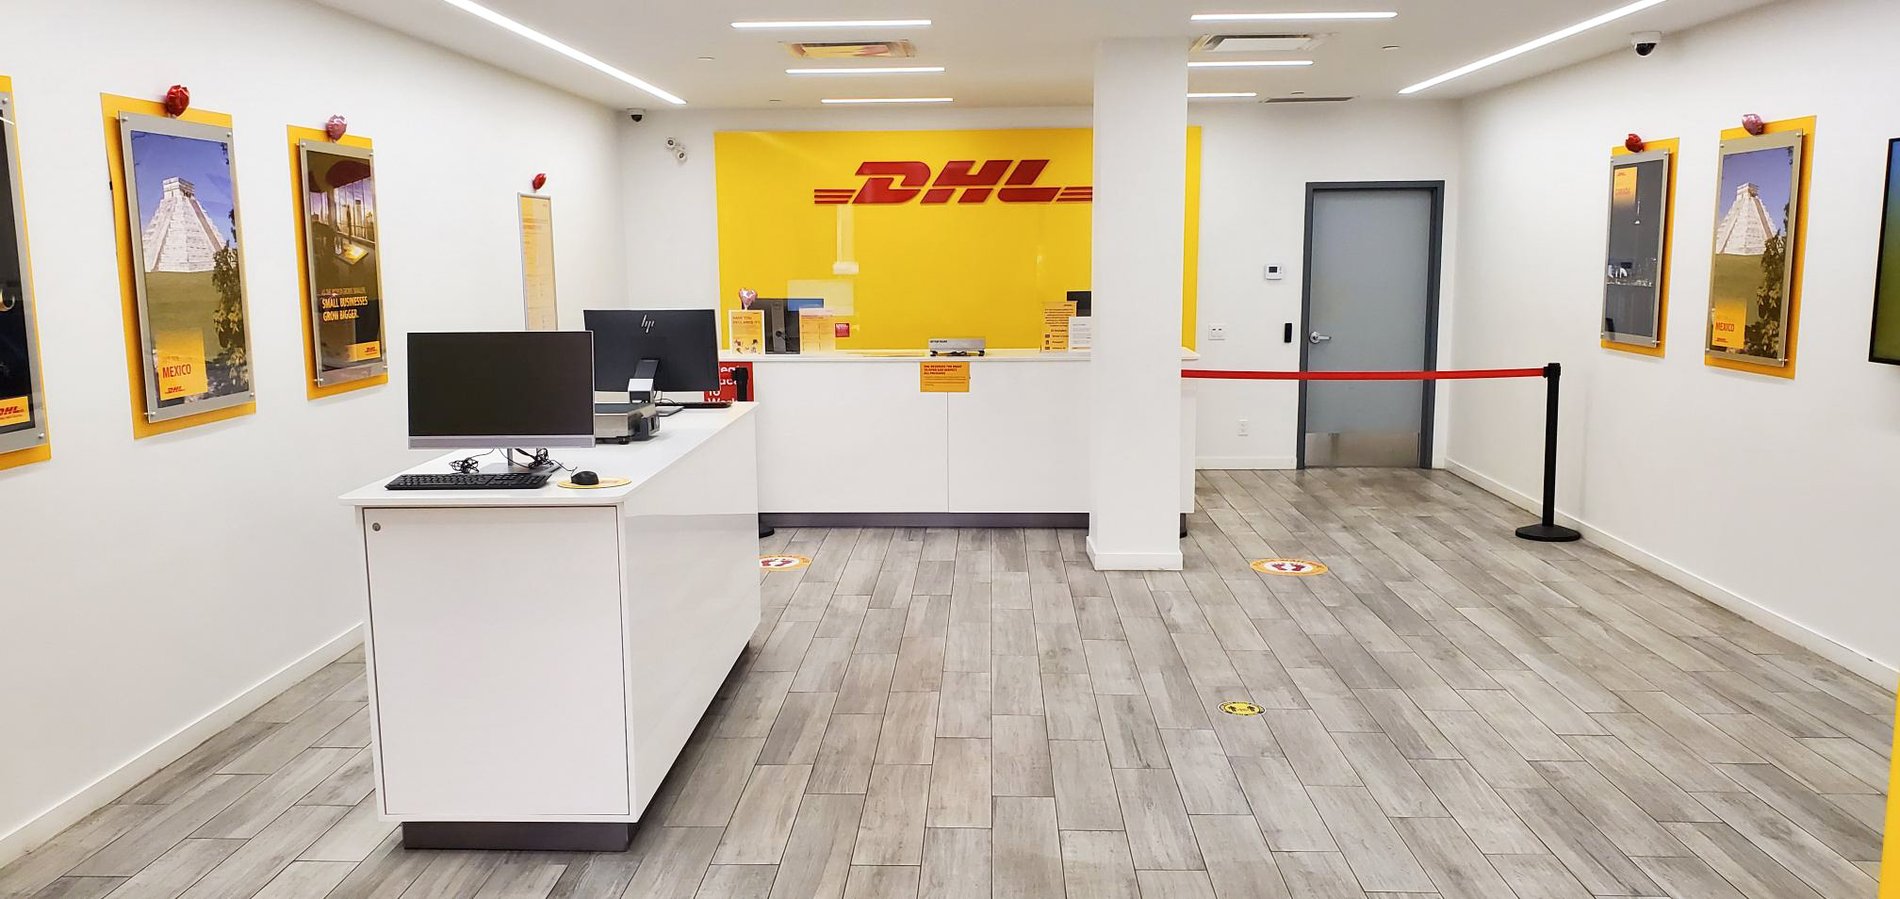 DHL hero section